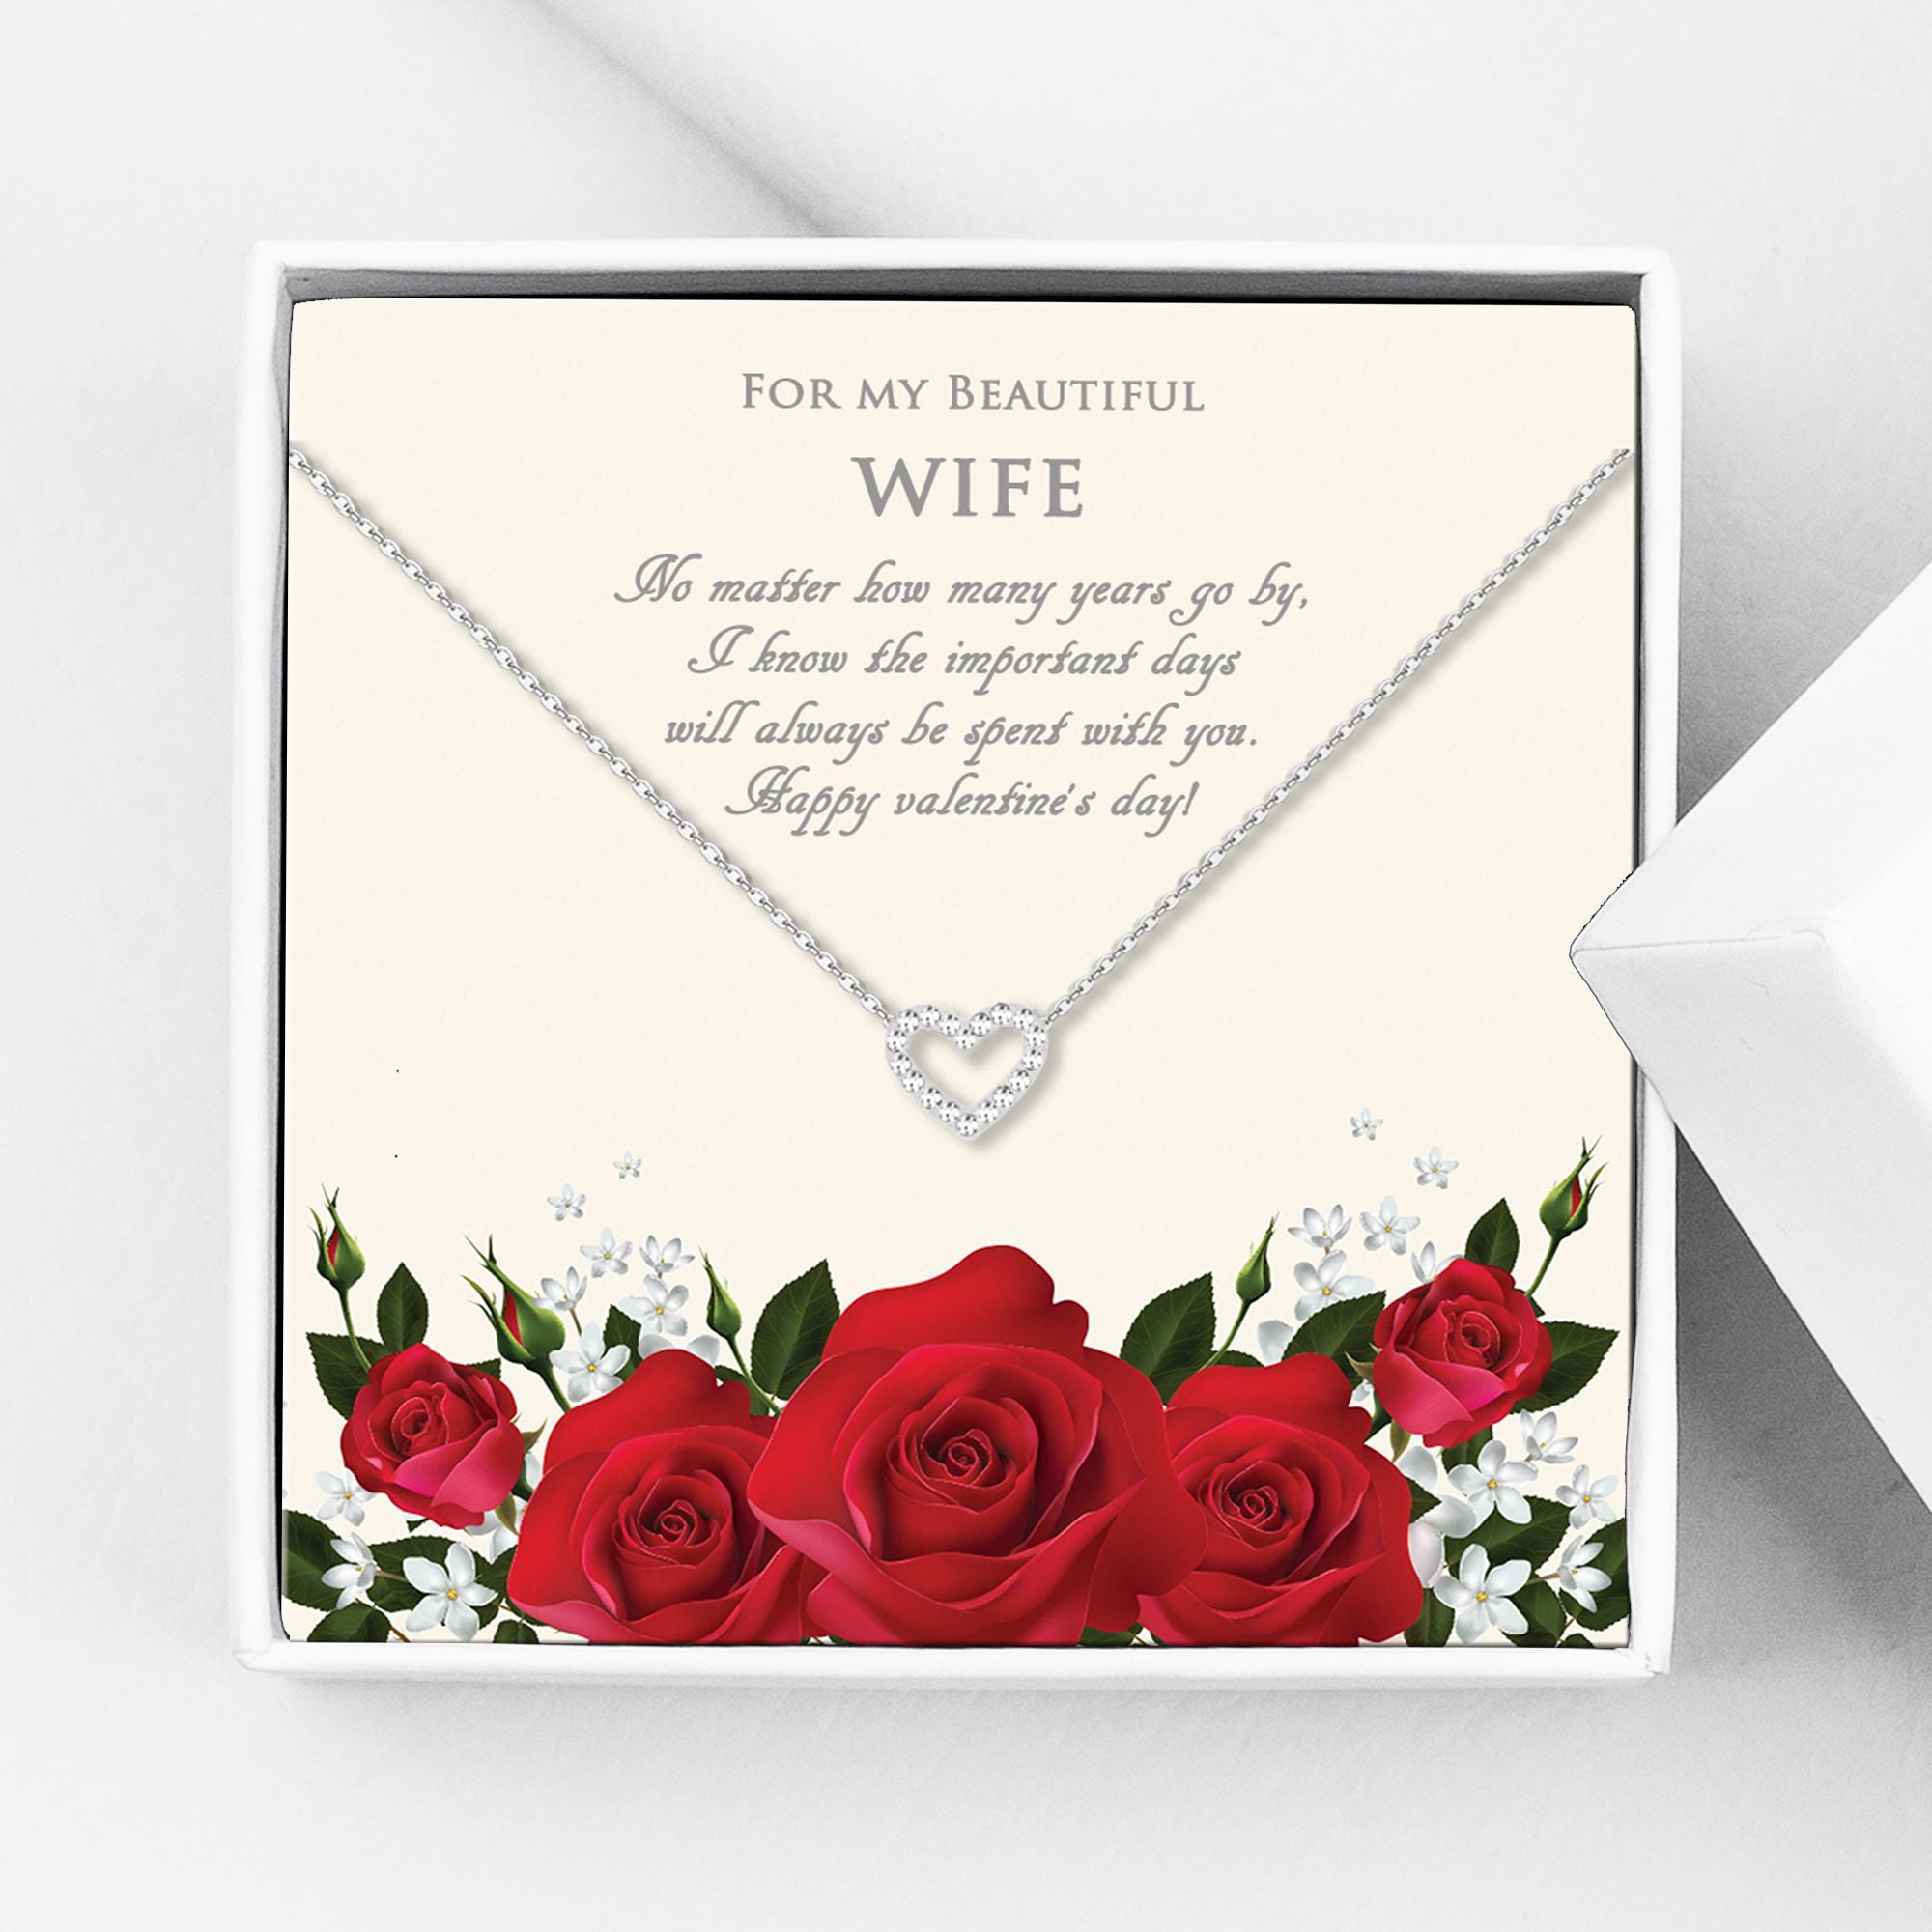 Pawzity Gifts for Wife from Husband - Mothers Day Gifts for Her, Wife Valentines Day Gifts - Anniversary I Love You Romantic Gifts for Her, Wife